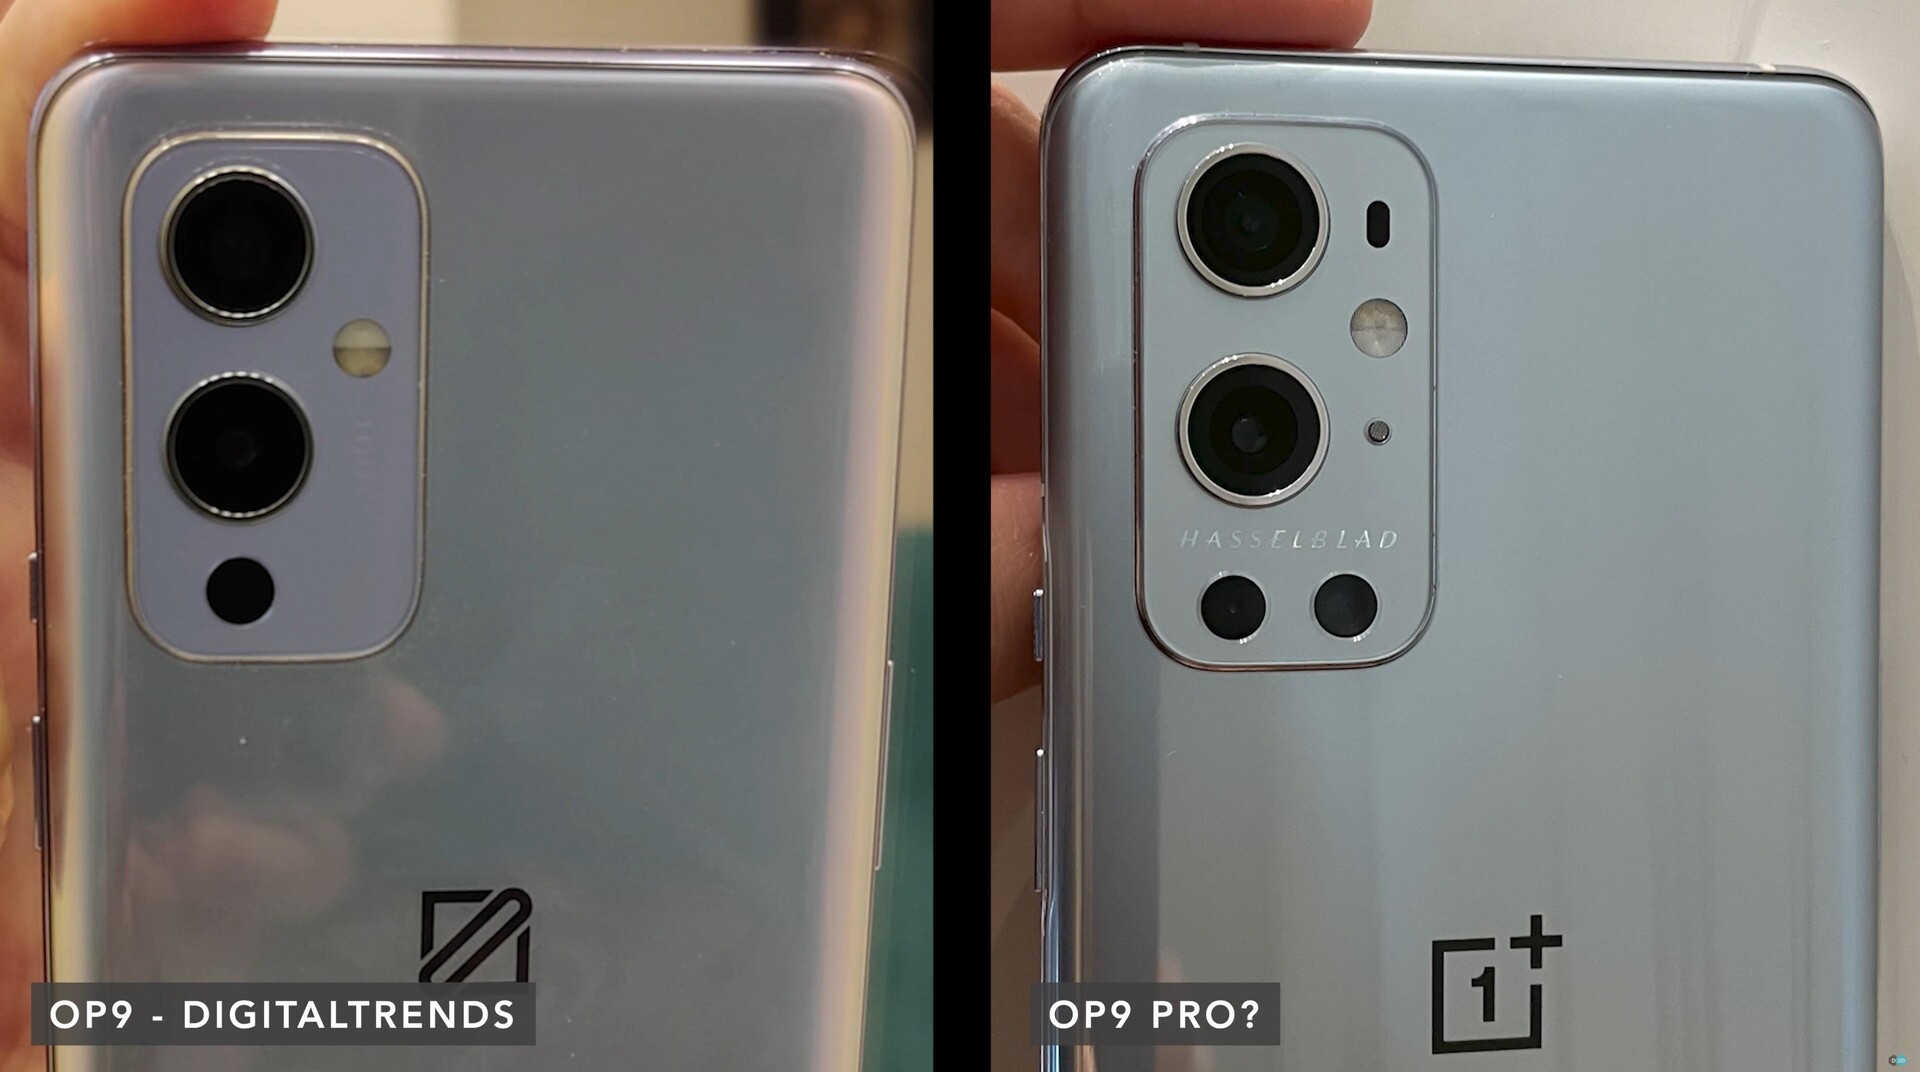 OnePlus 9 Pro leaks back into live photos;  Hasselblad partnership and extended camera hardware confirmed, as well as a 120 Hz display and a QHD + display